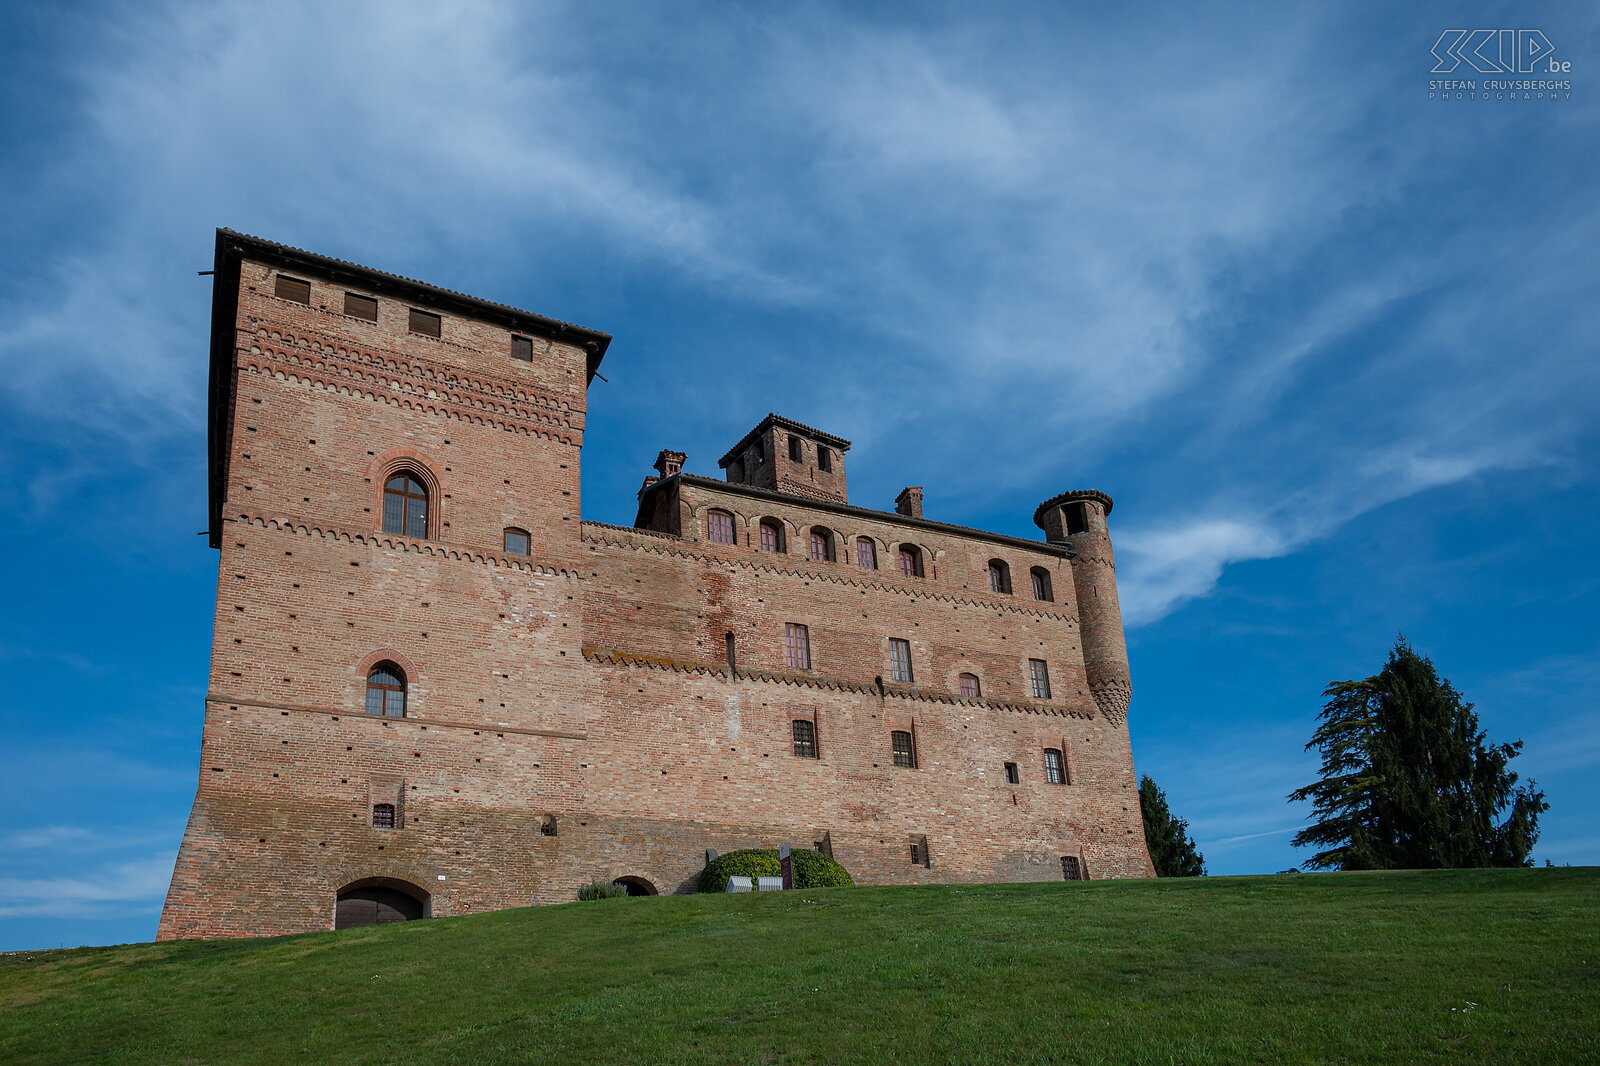 Grinzane Cavour - Castello di Grinzane Cavour The 13th-century castle of Grinzane Cavour stands on top of a hill and is inscribed on the UNESCO World Heritage List. The medieval character has been perfectly preserved and it is now a museum, enoteca and restaurant. All around the castle are vineyards and the view is beautiful. The statesman Count Camillo Benso of Cavour lived there for several years and played an important role in the Italian unification (1861), was the architect of the Italian constitution and became the first prime minister of a unified Italy. Stefan Cruysberghs